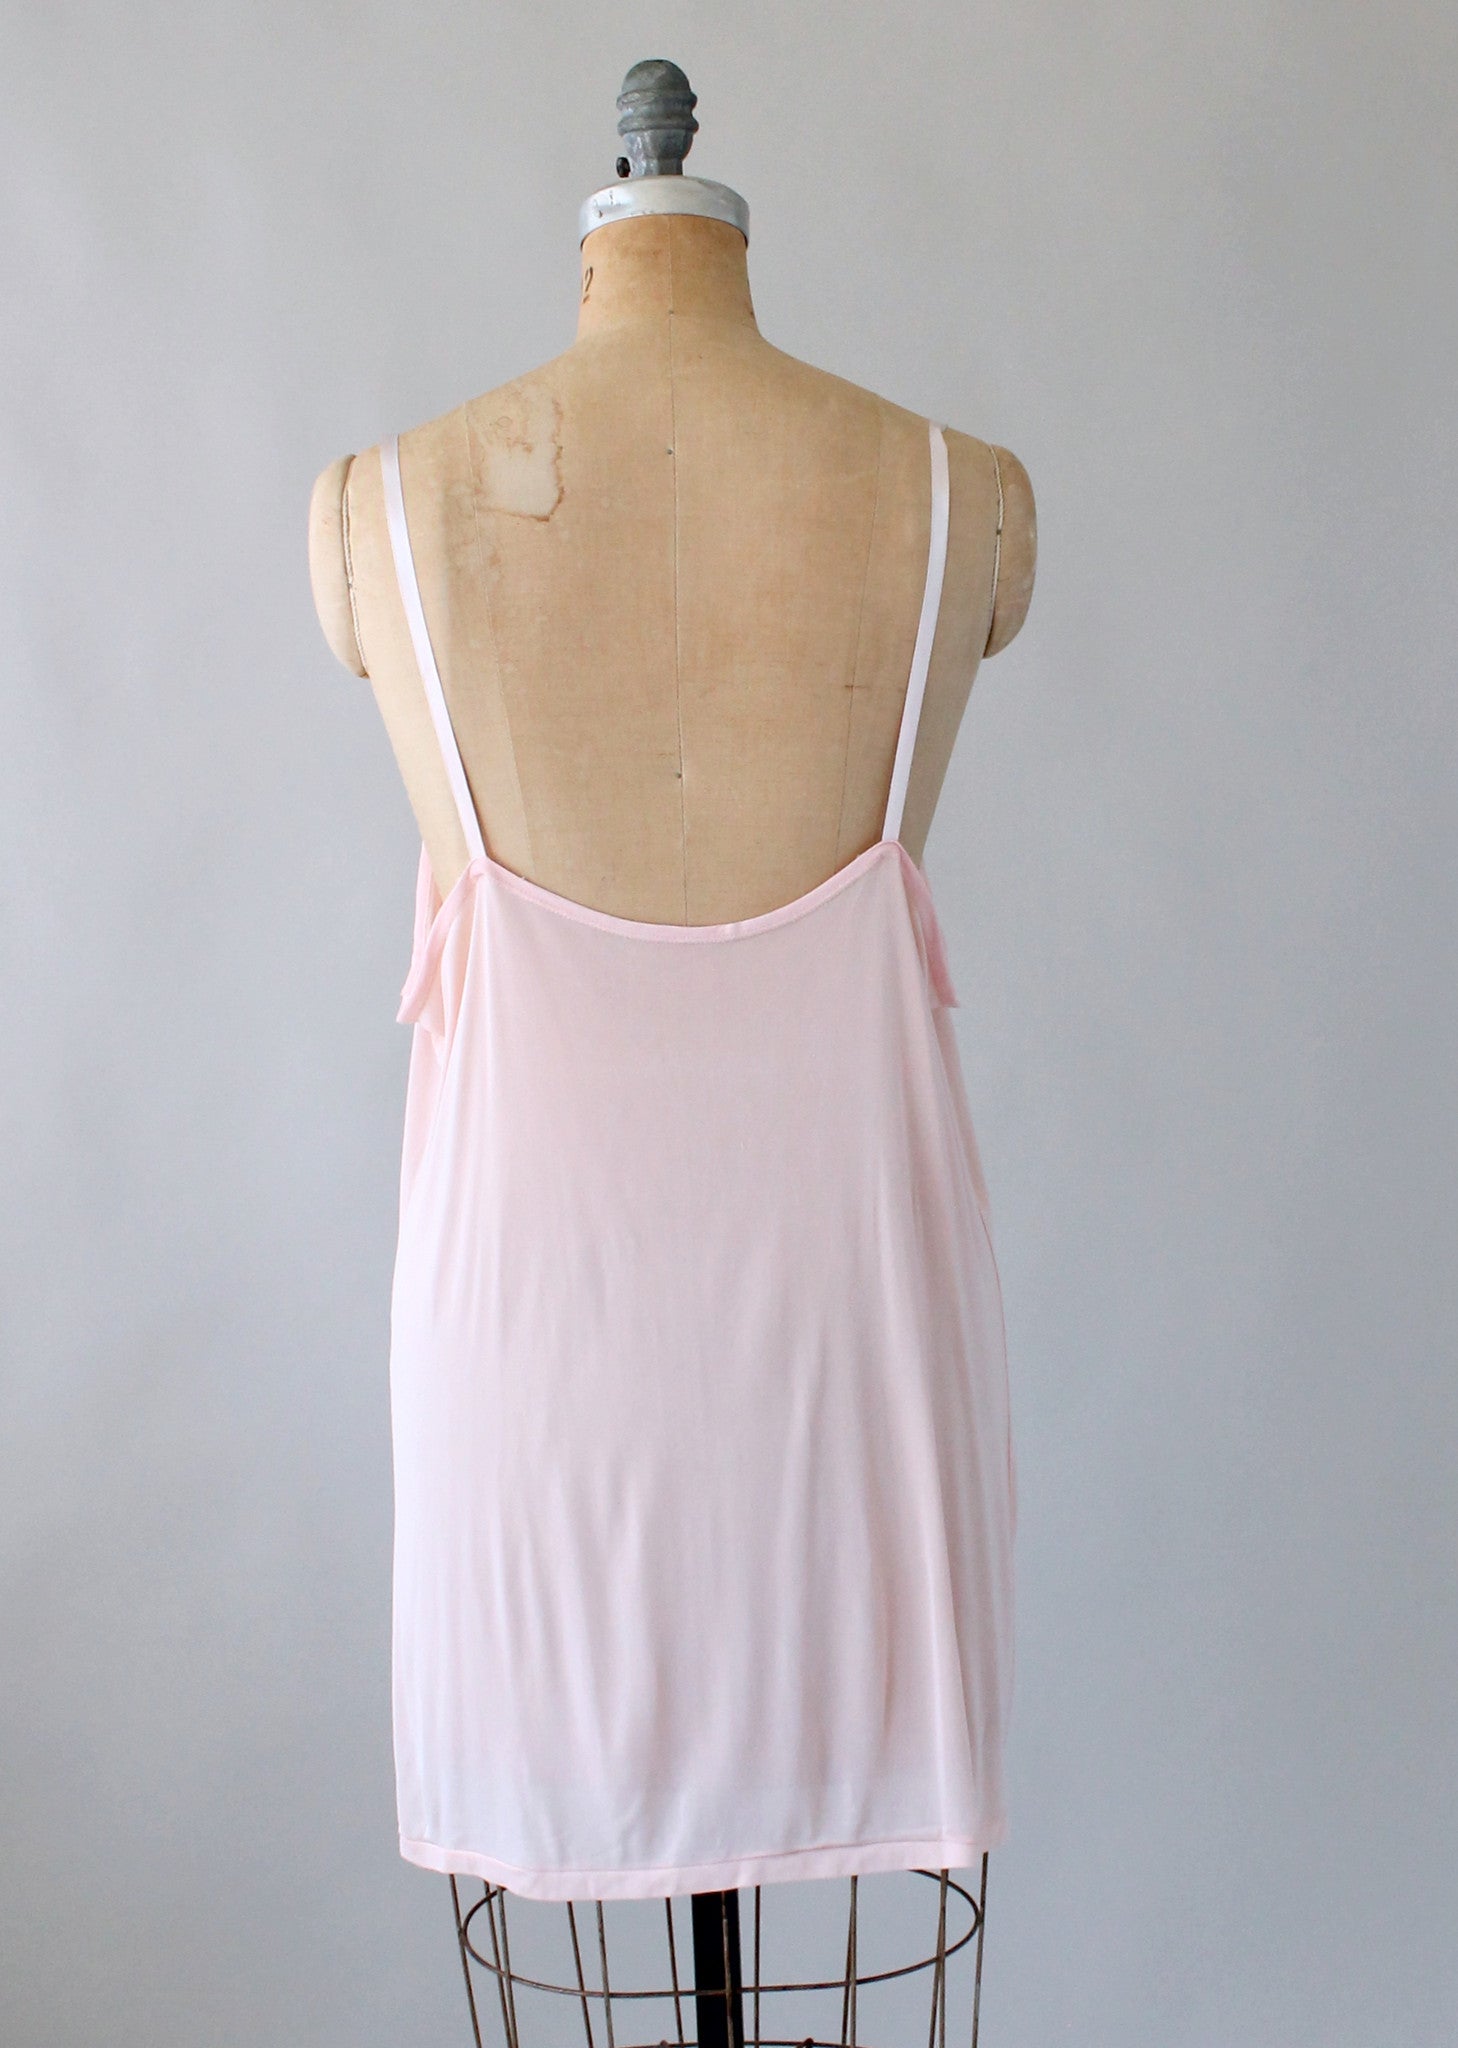 Vintage 1940s Rayon Knit Camisole Tank - Raleigh Vintage